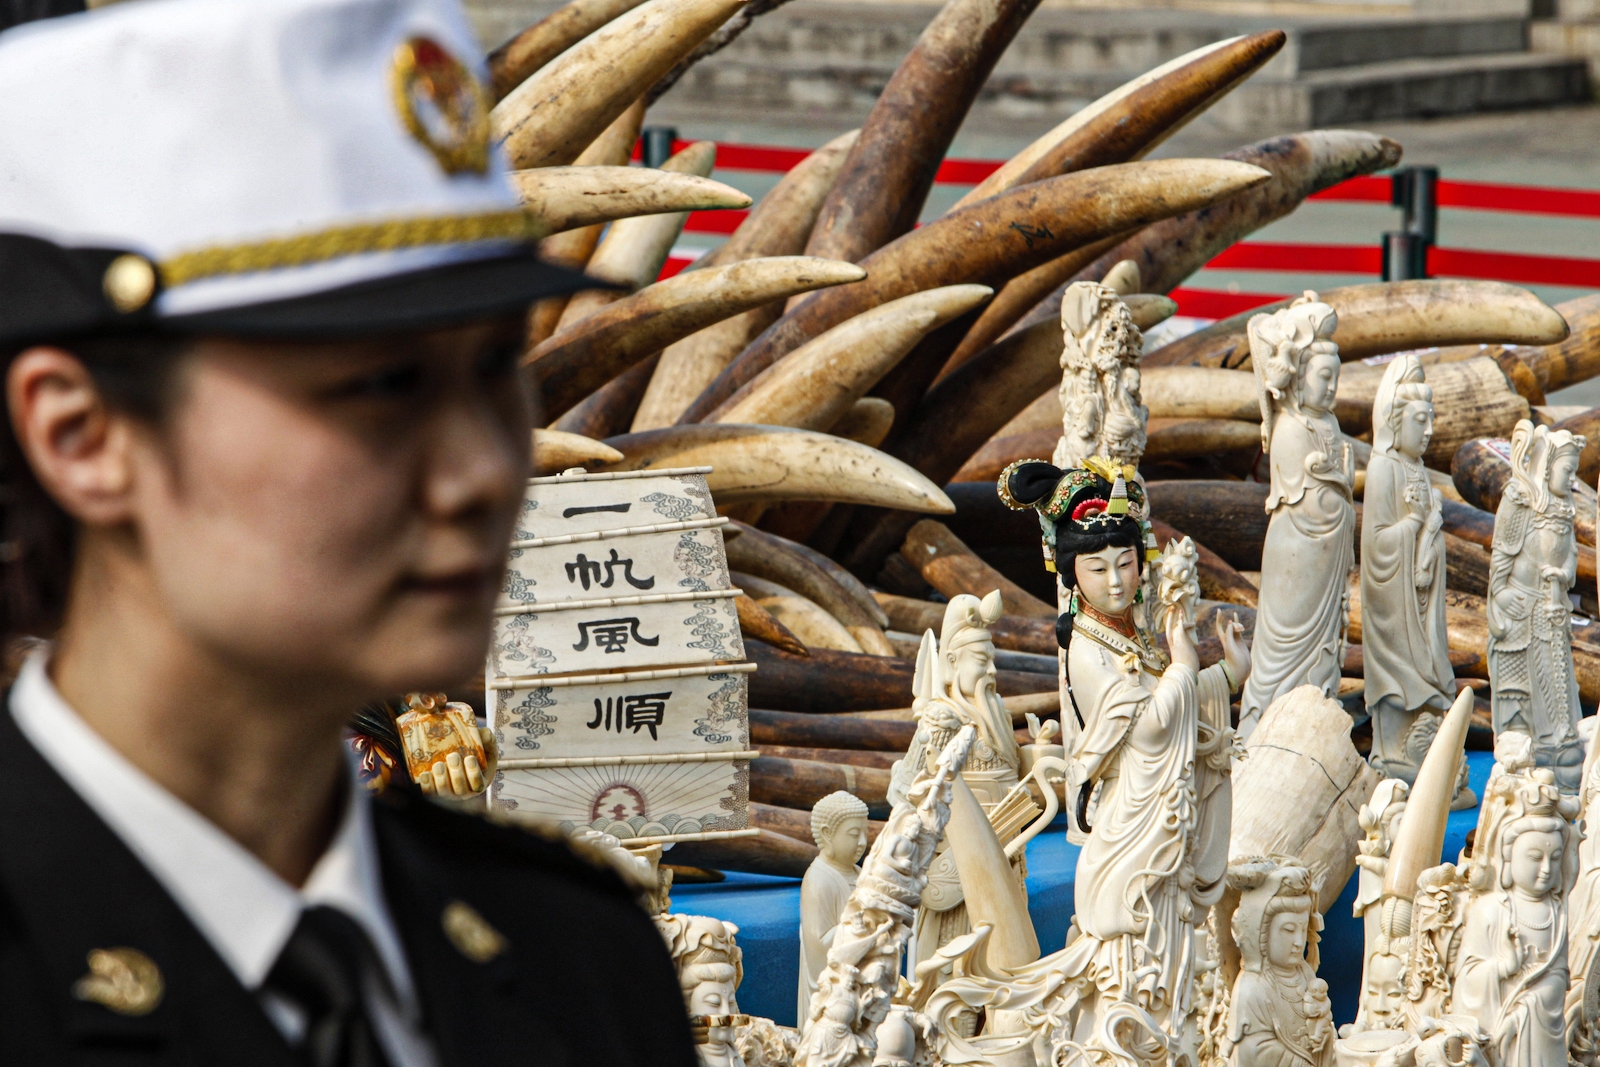 Confiscated ivory in China